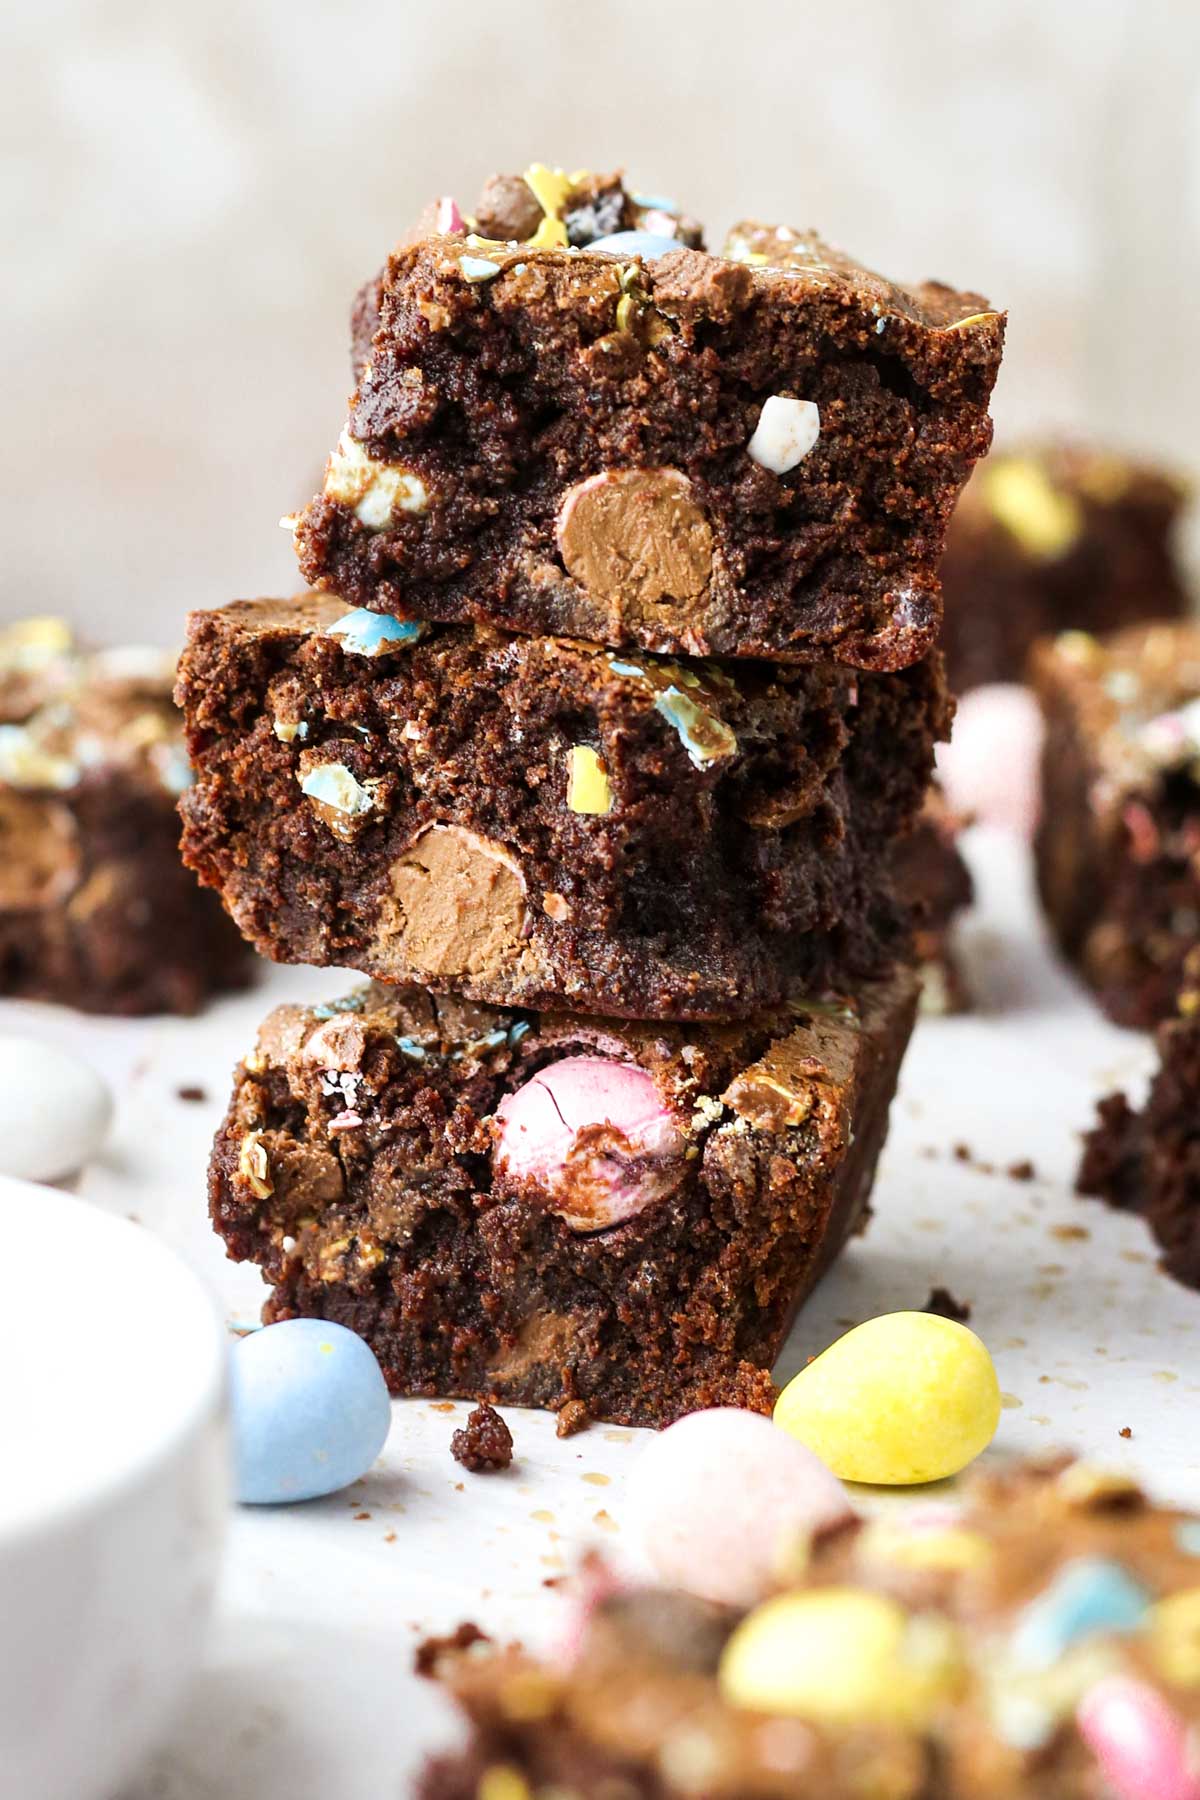 A stack of three brownies shown from the side, with chocolate eggs baked in each brownie.